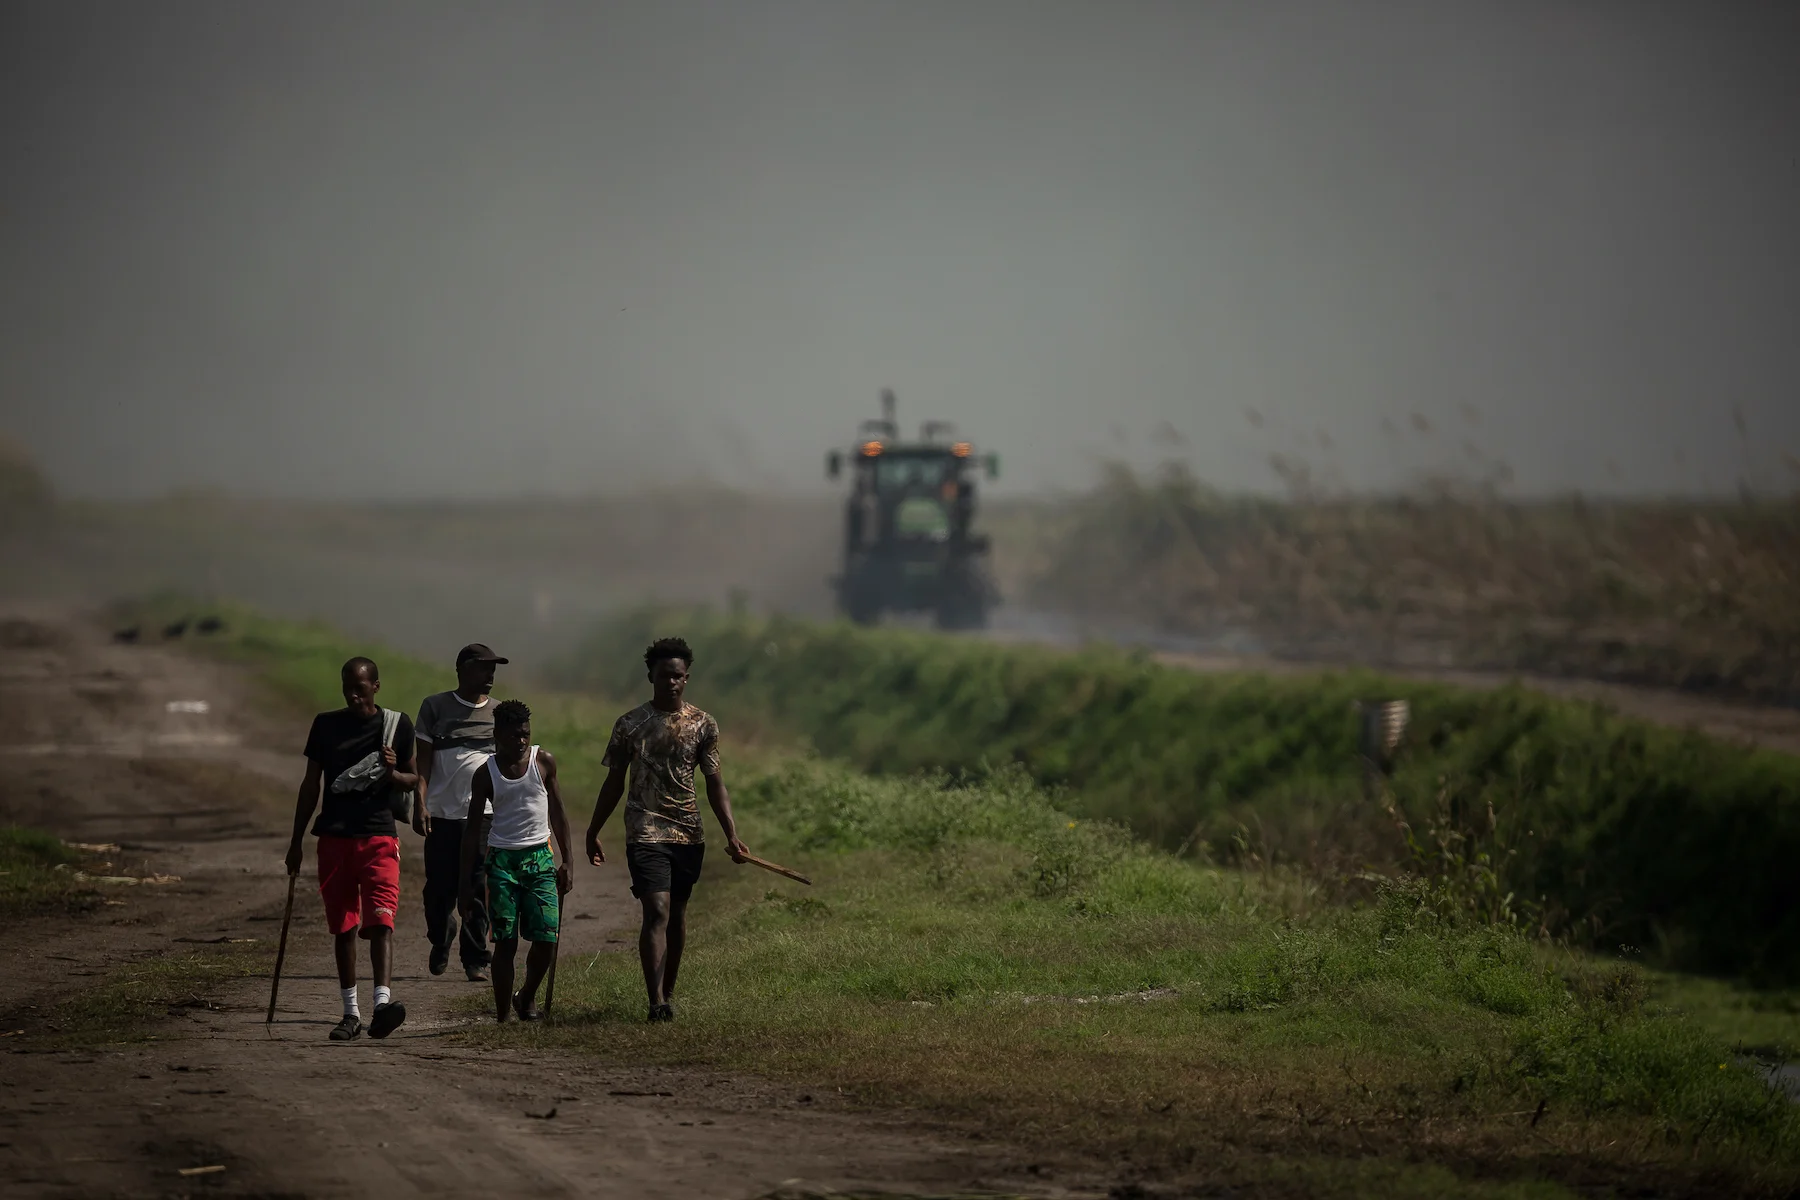 A group of young men walk on a road in front of a sugar cane field, with a tractor driving in the background. The air is hazy with smoke.